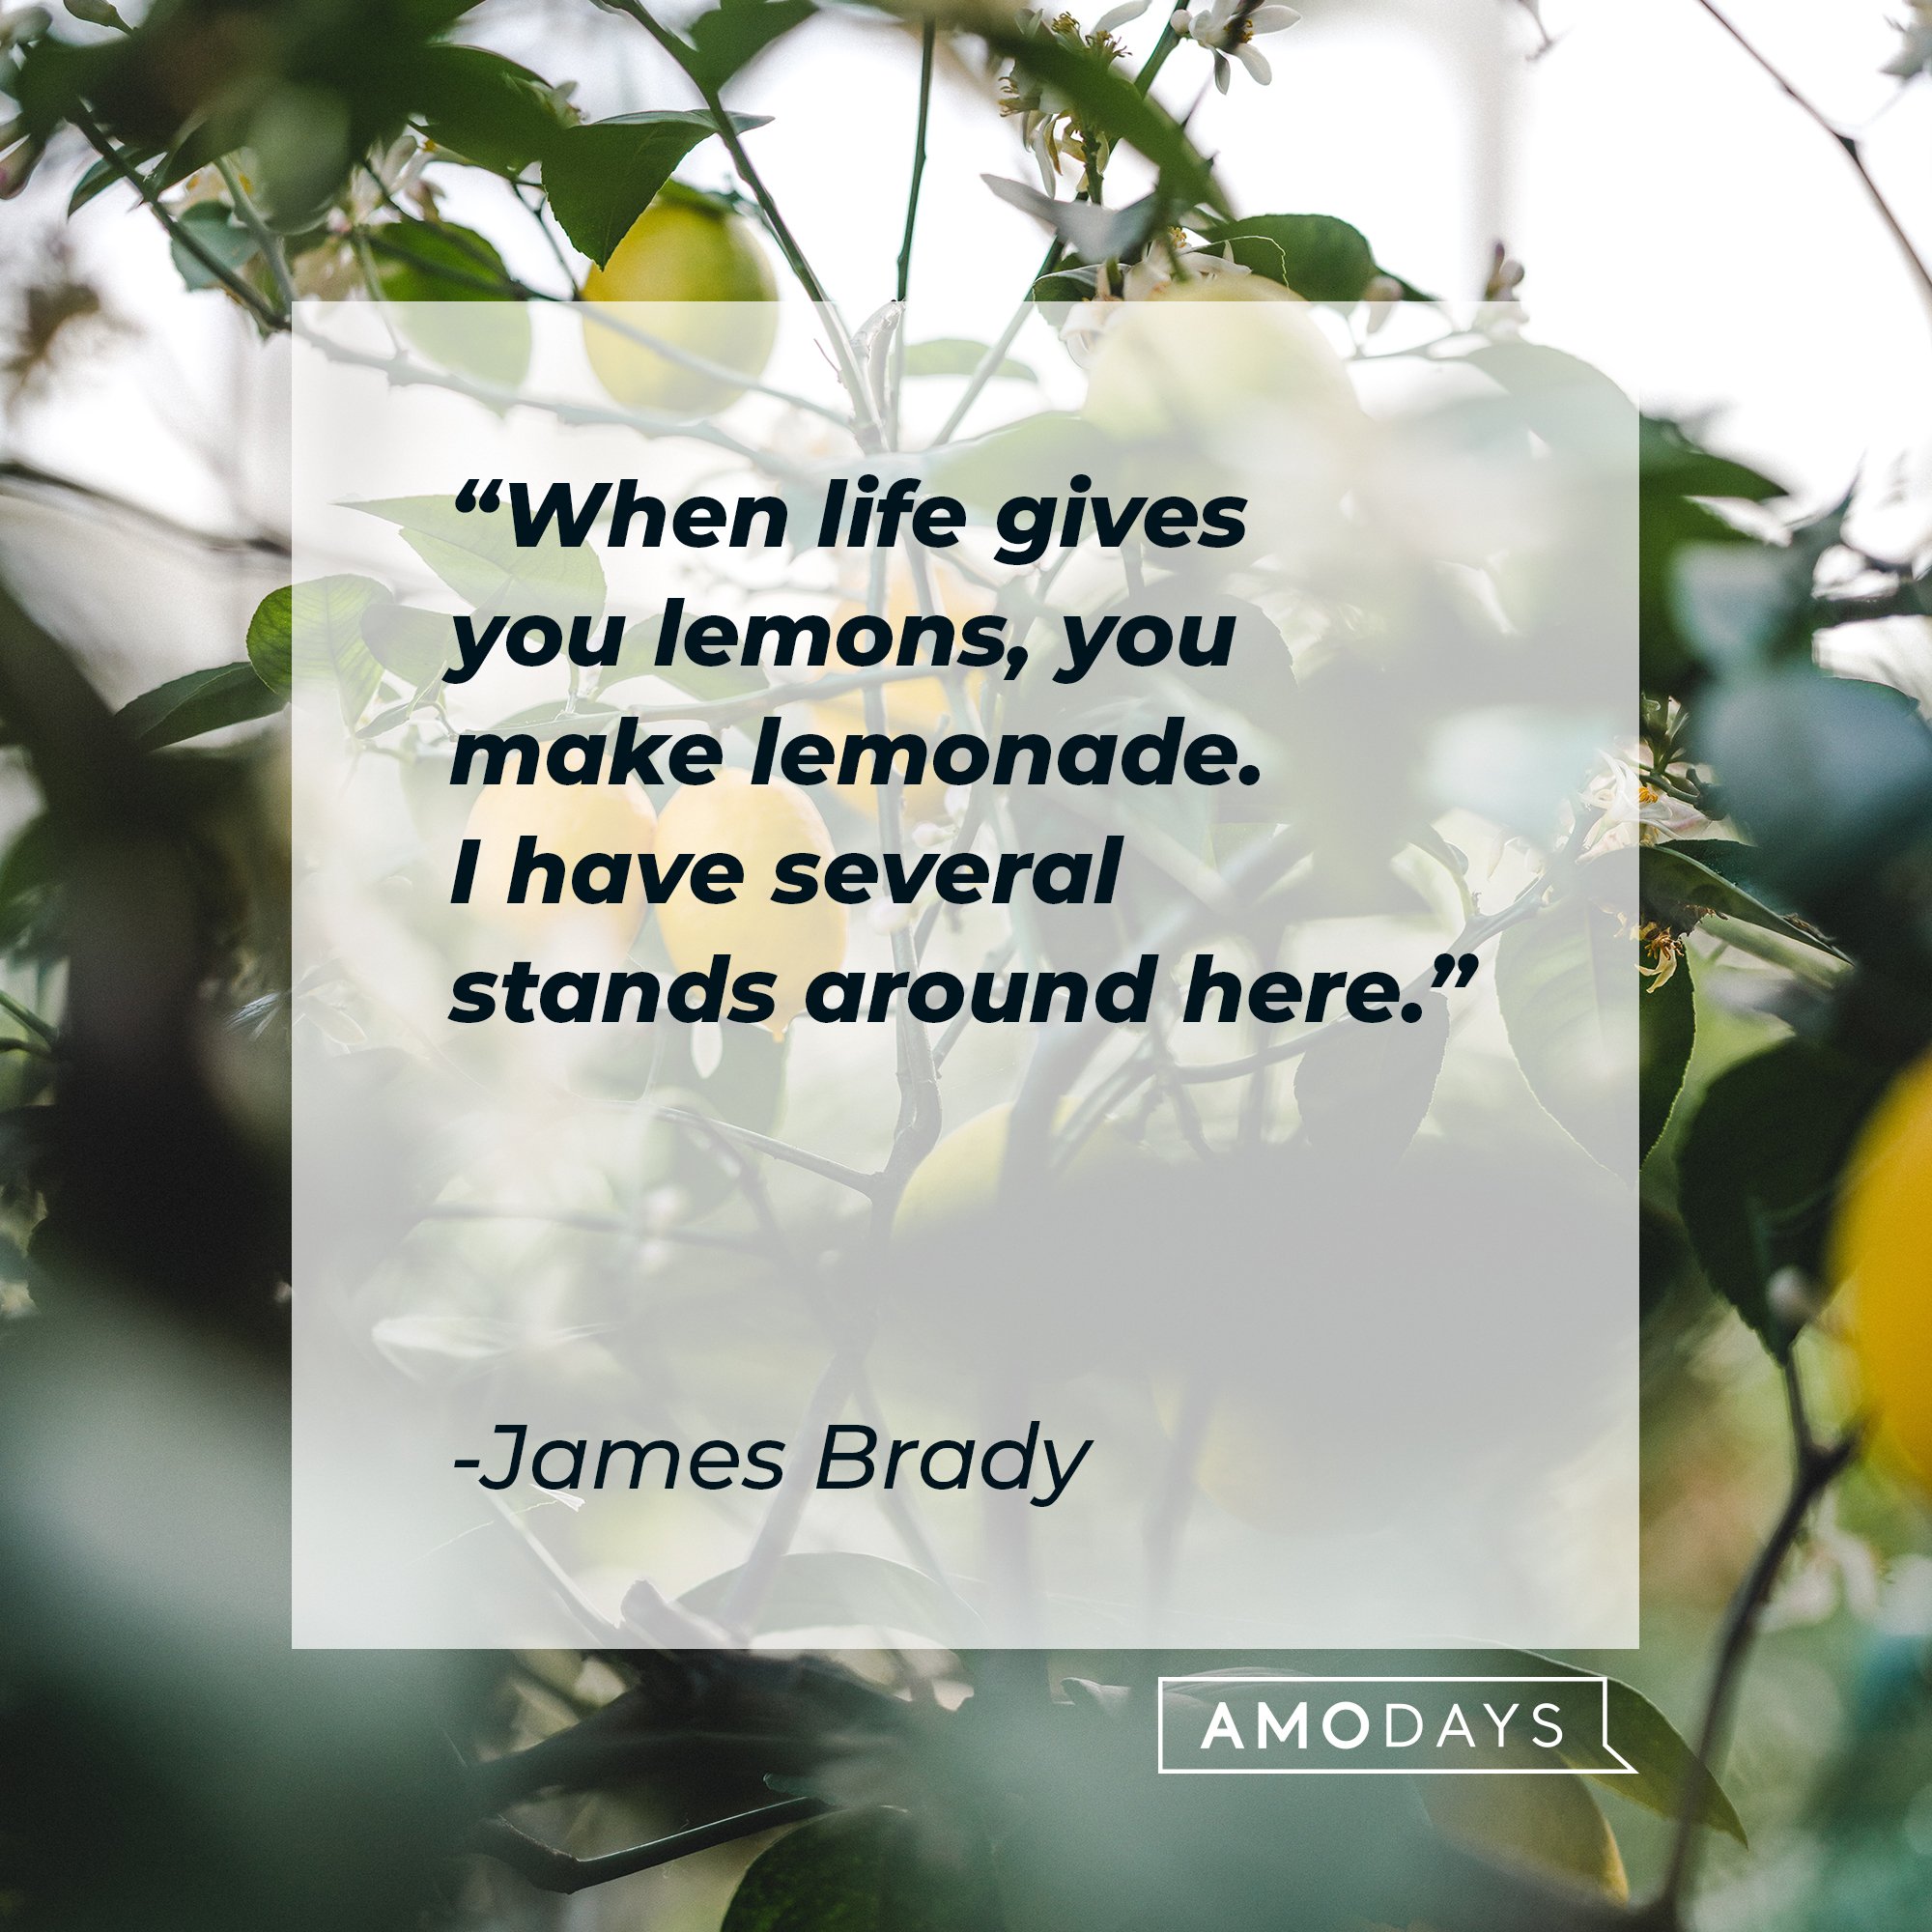 Grace Helbig’s quote: "When life gives you lemons, you exchange them at the store for something more edible.”  | Image: AmoDays 